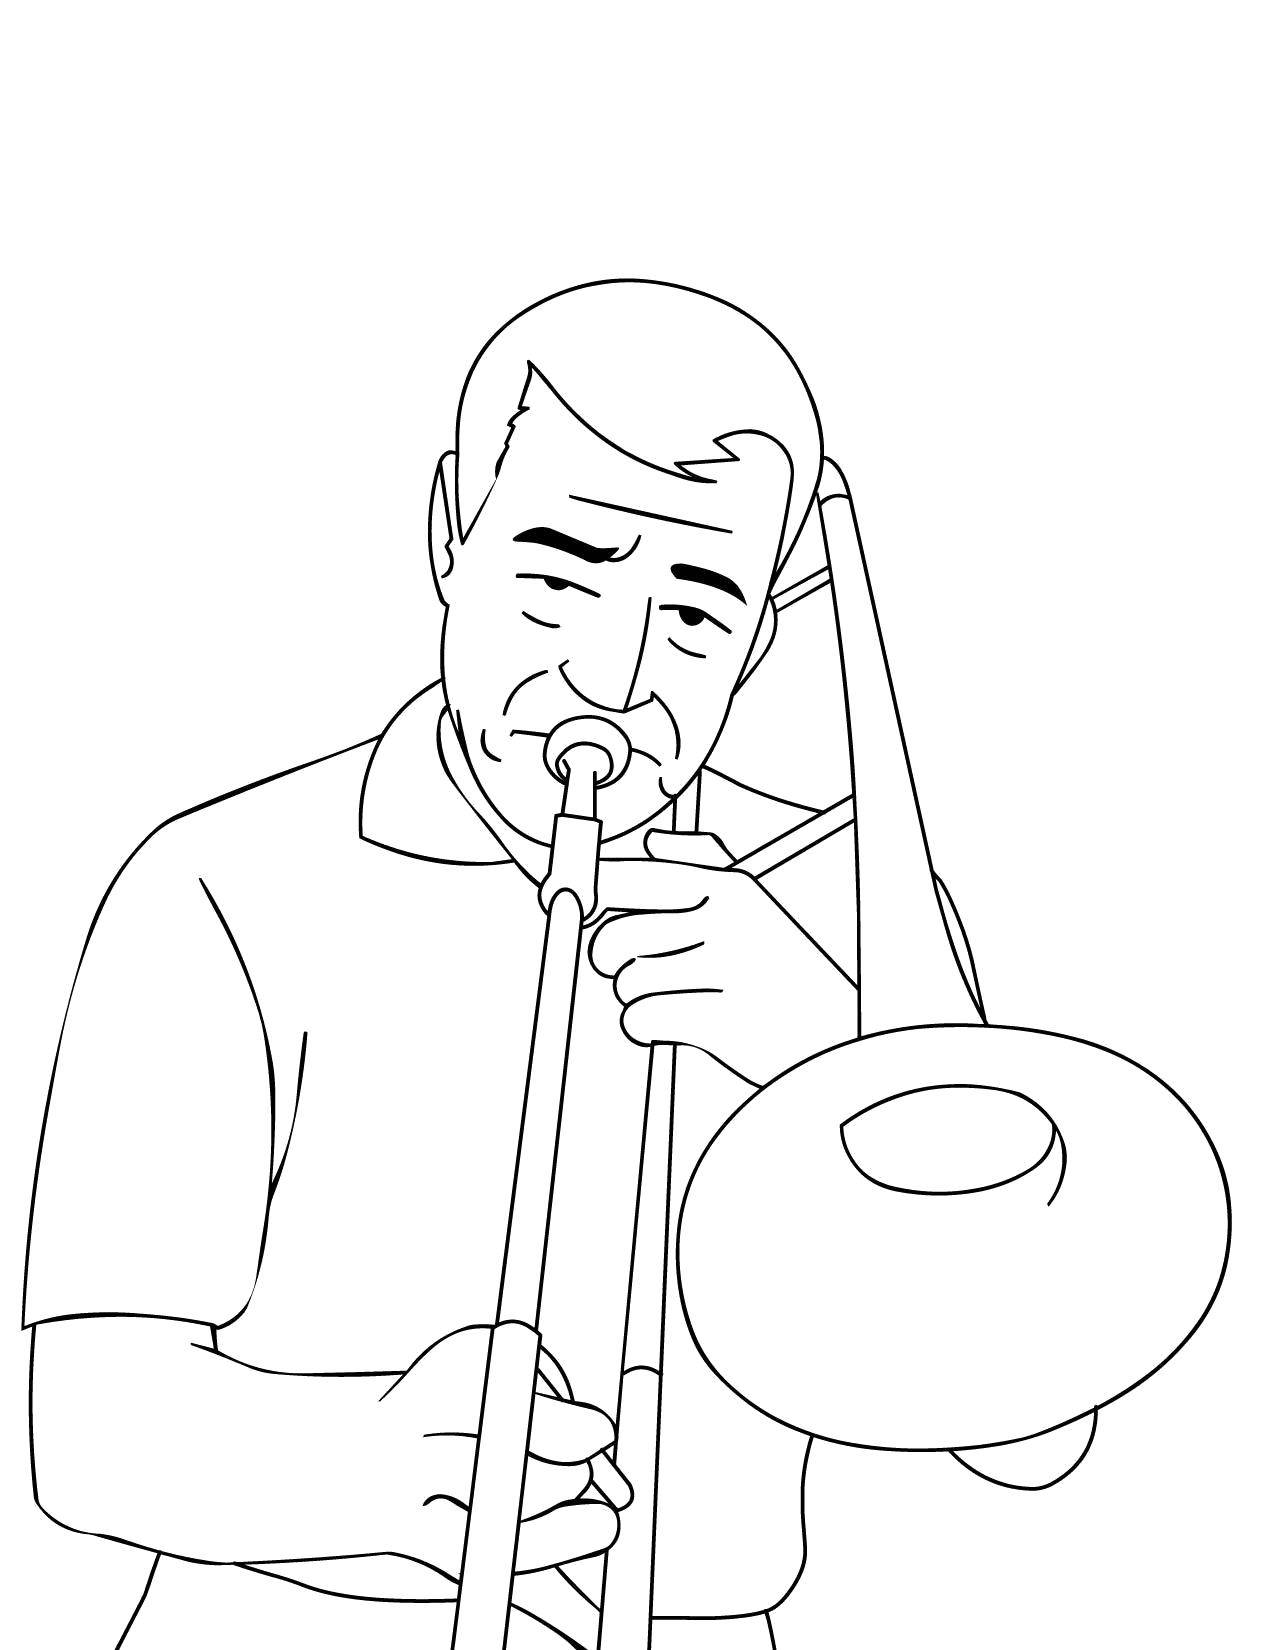 Coloring Musician. Category Music. Tags:  Music, instrument, musician, note.